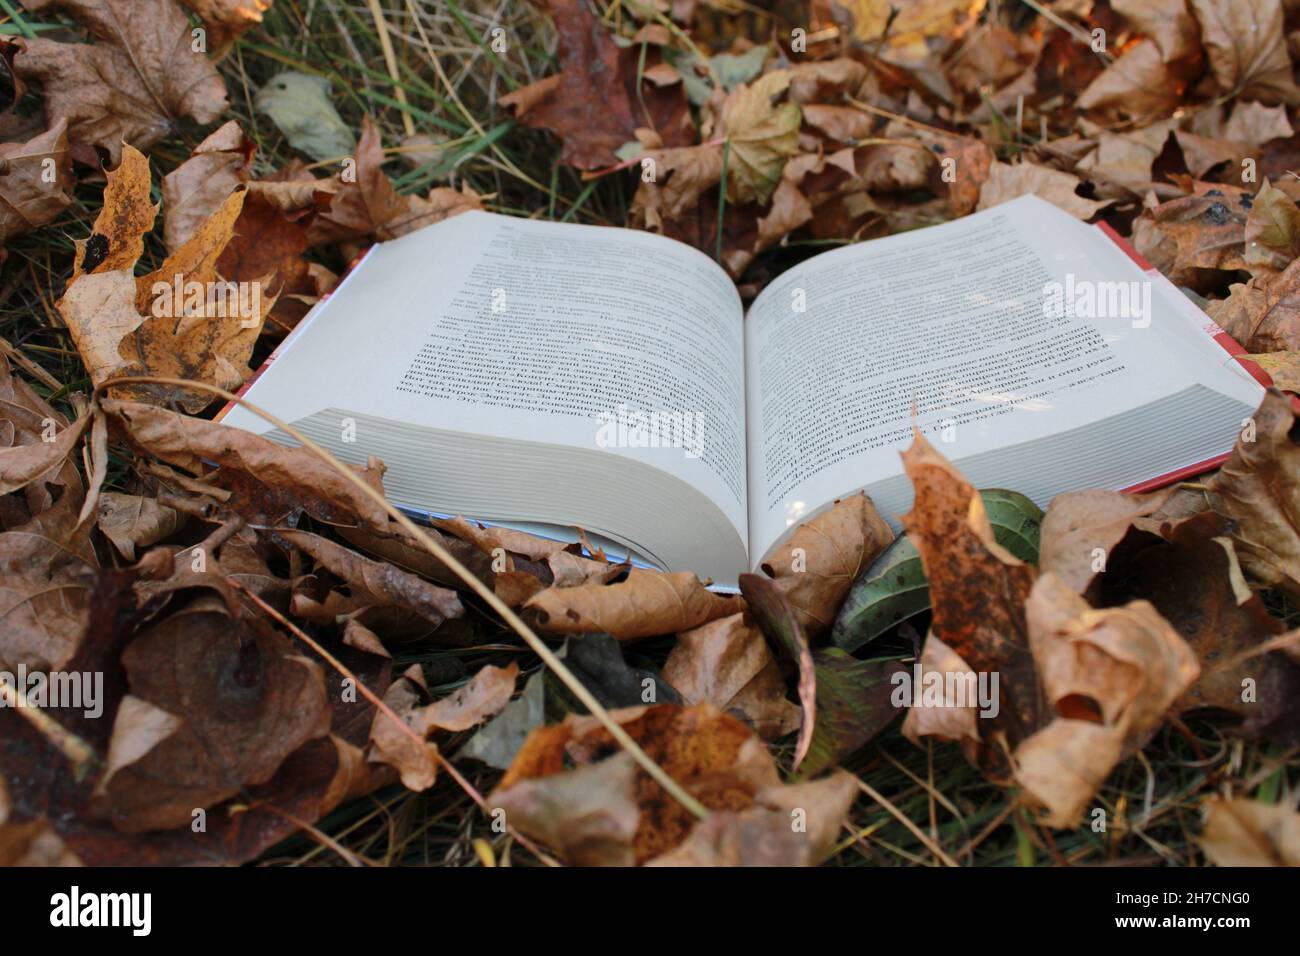 an open book on the ground. books on the background of the leaves. an autumn day in the forest perfect for reading Stock Photo